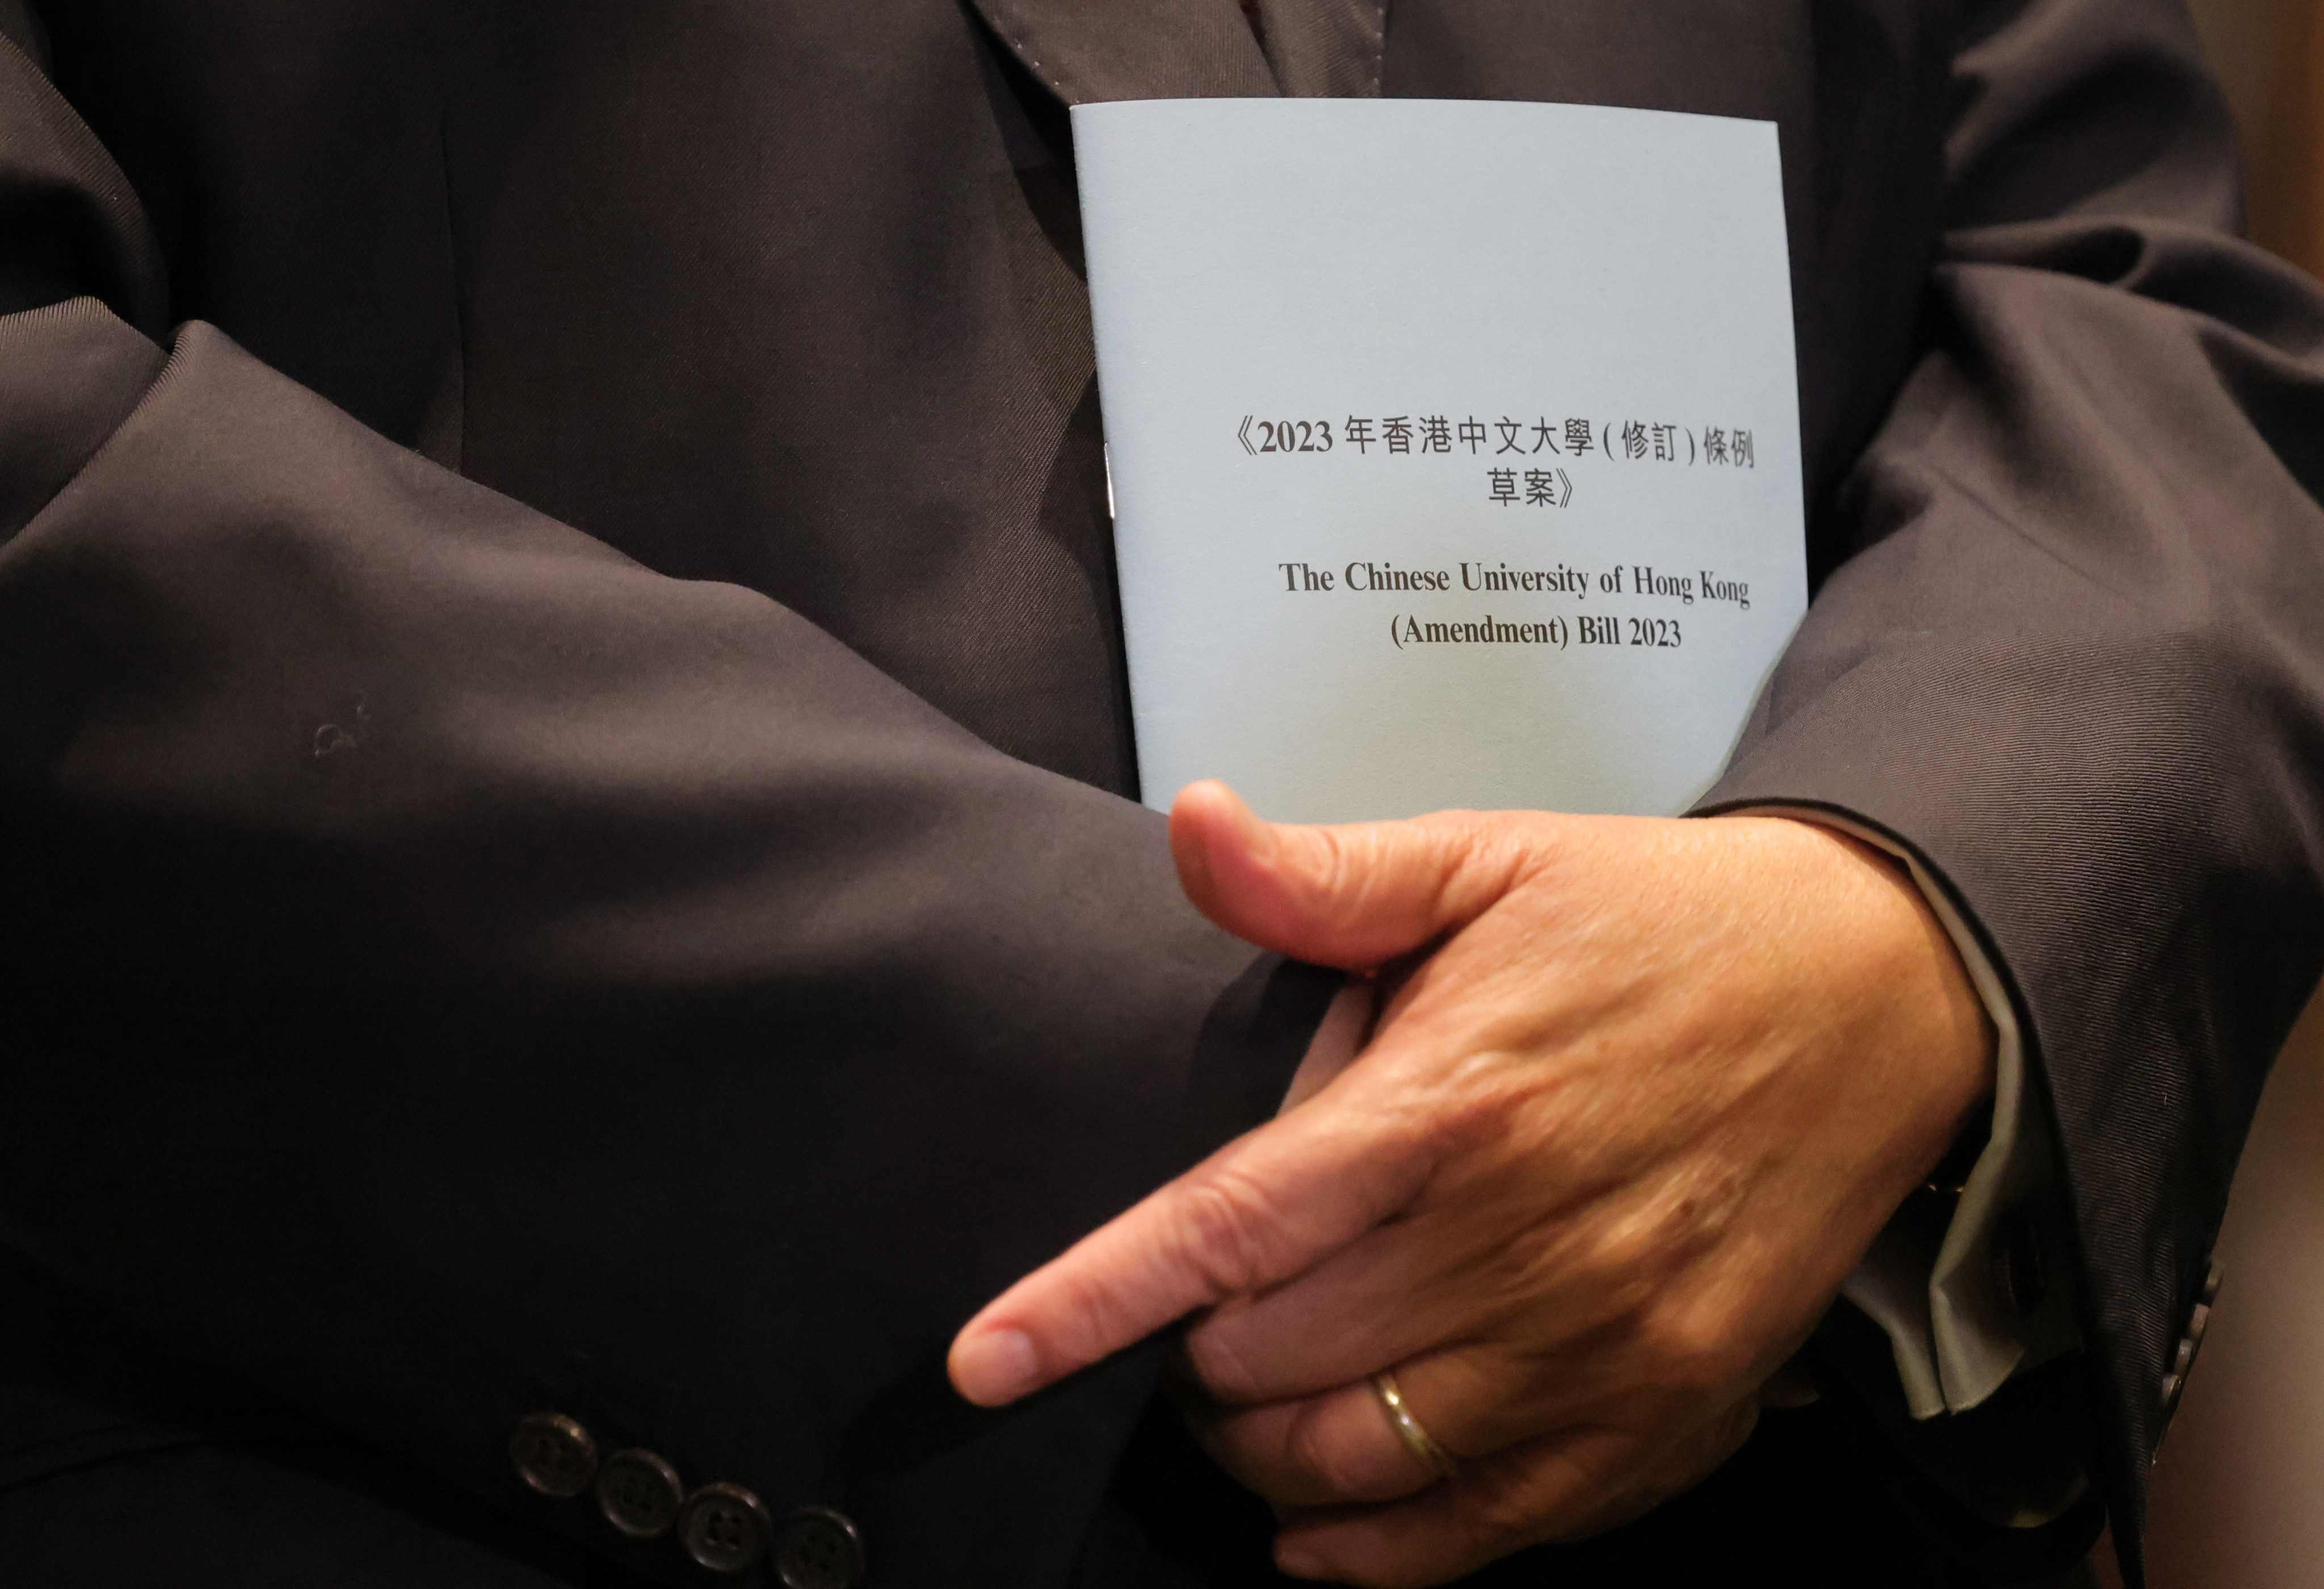 Lawmaker Tommy Cheung holds a copy of the Chinese University of Hong Kong (Amendment) Bill 2023, a private members’ bill initiated by him and two other lawmakers, on June 27. Photo: Jelly Tse